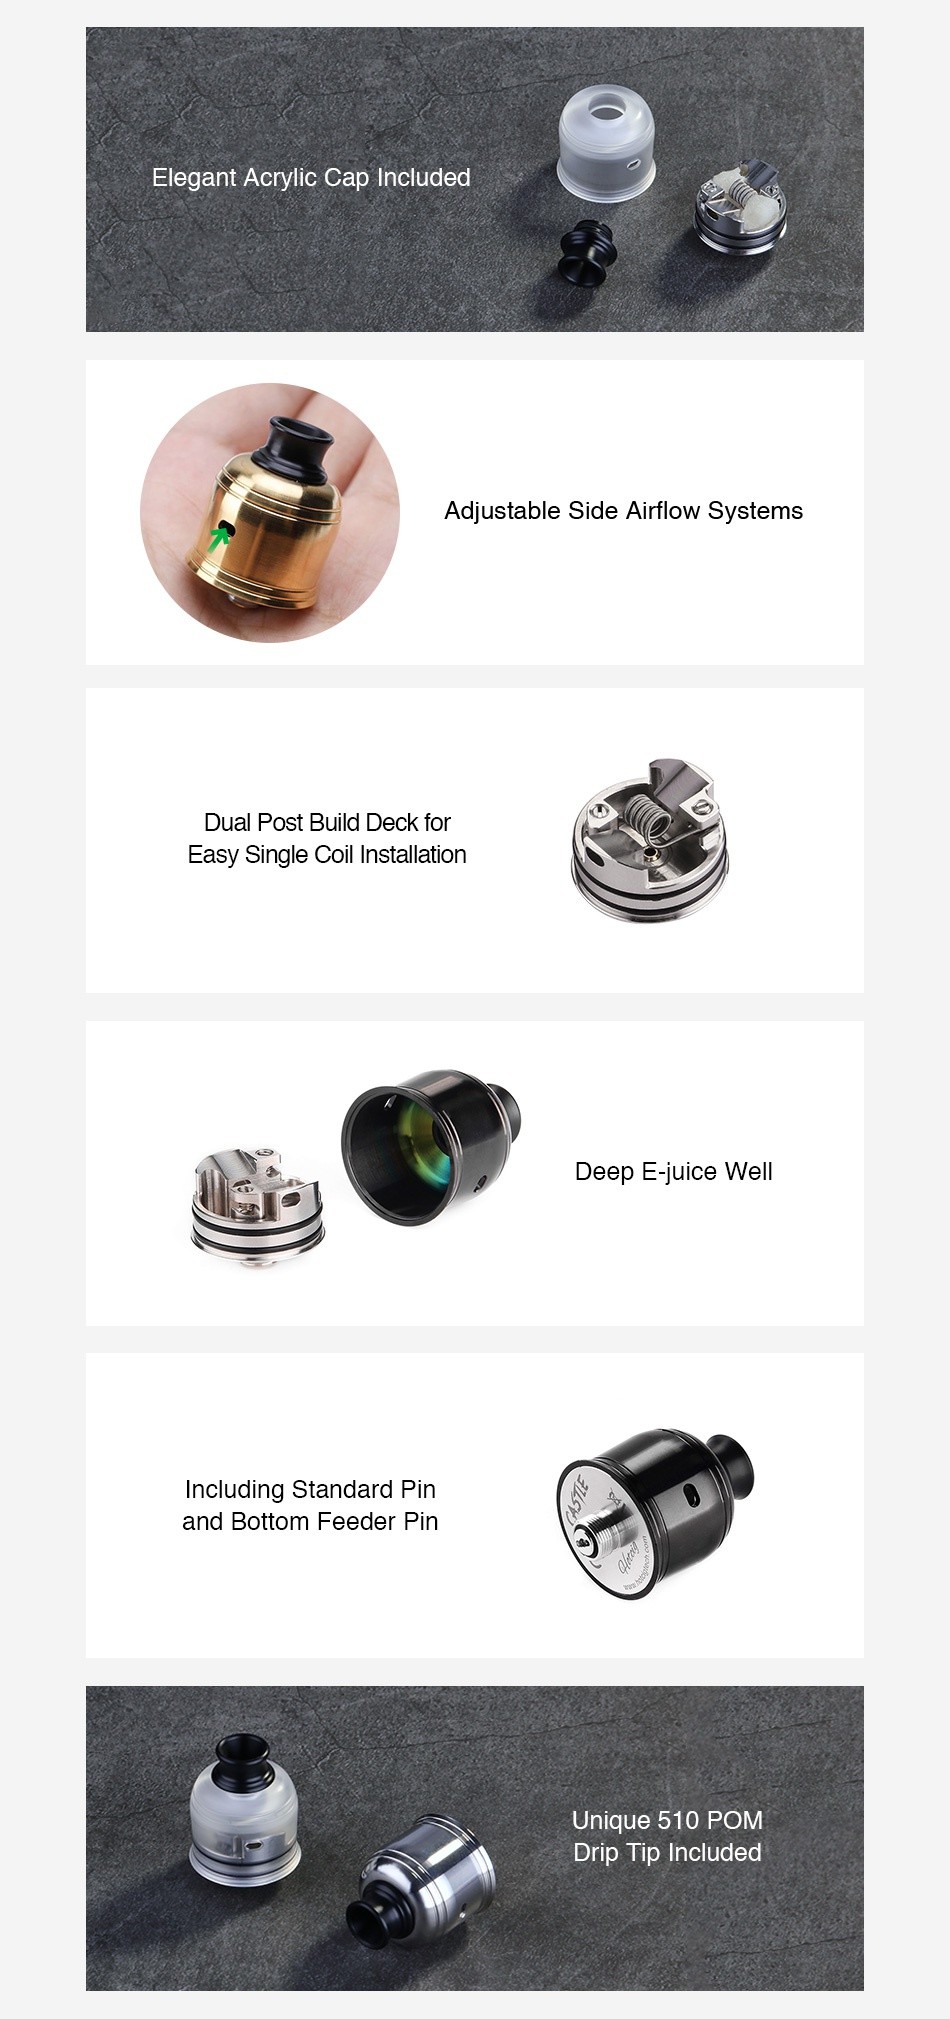 Hotcig Castle BF RDA Elegant Acrylic Cap Included Adjustable Side airflow Systems Dual Post build deck for Easy Single Coil Installation Deep E juice Well ncluding Standard Pin and bottom feeder pin Unique 510 POM Drip Tip Included